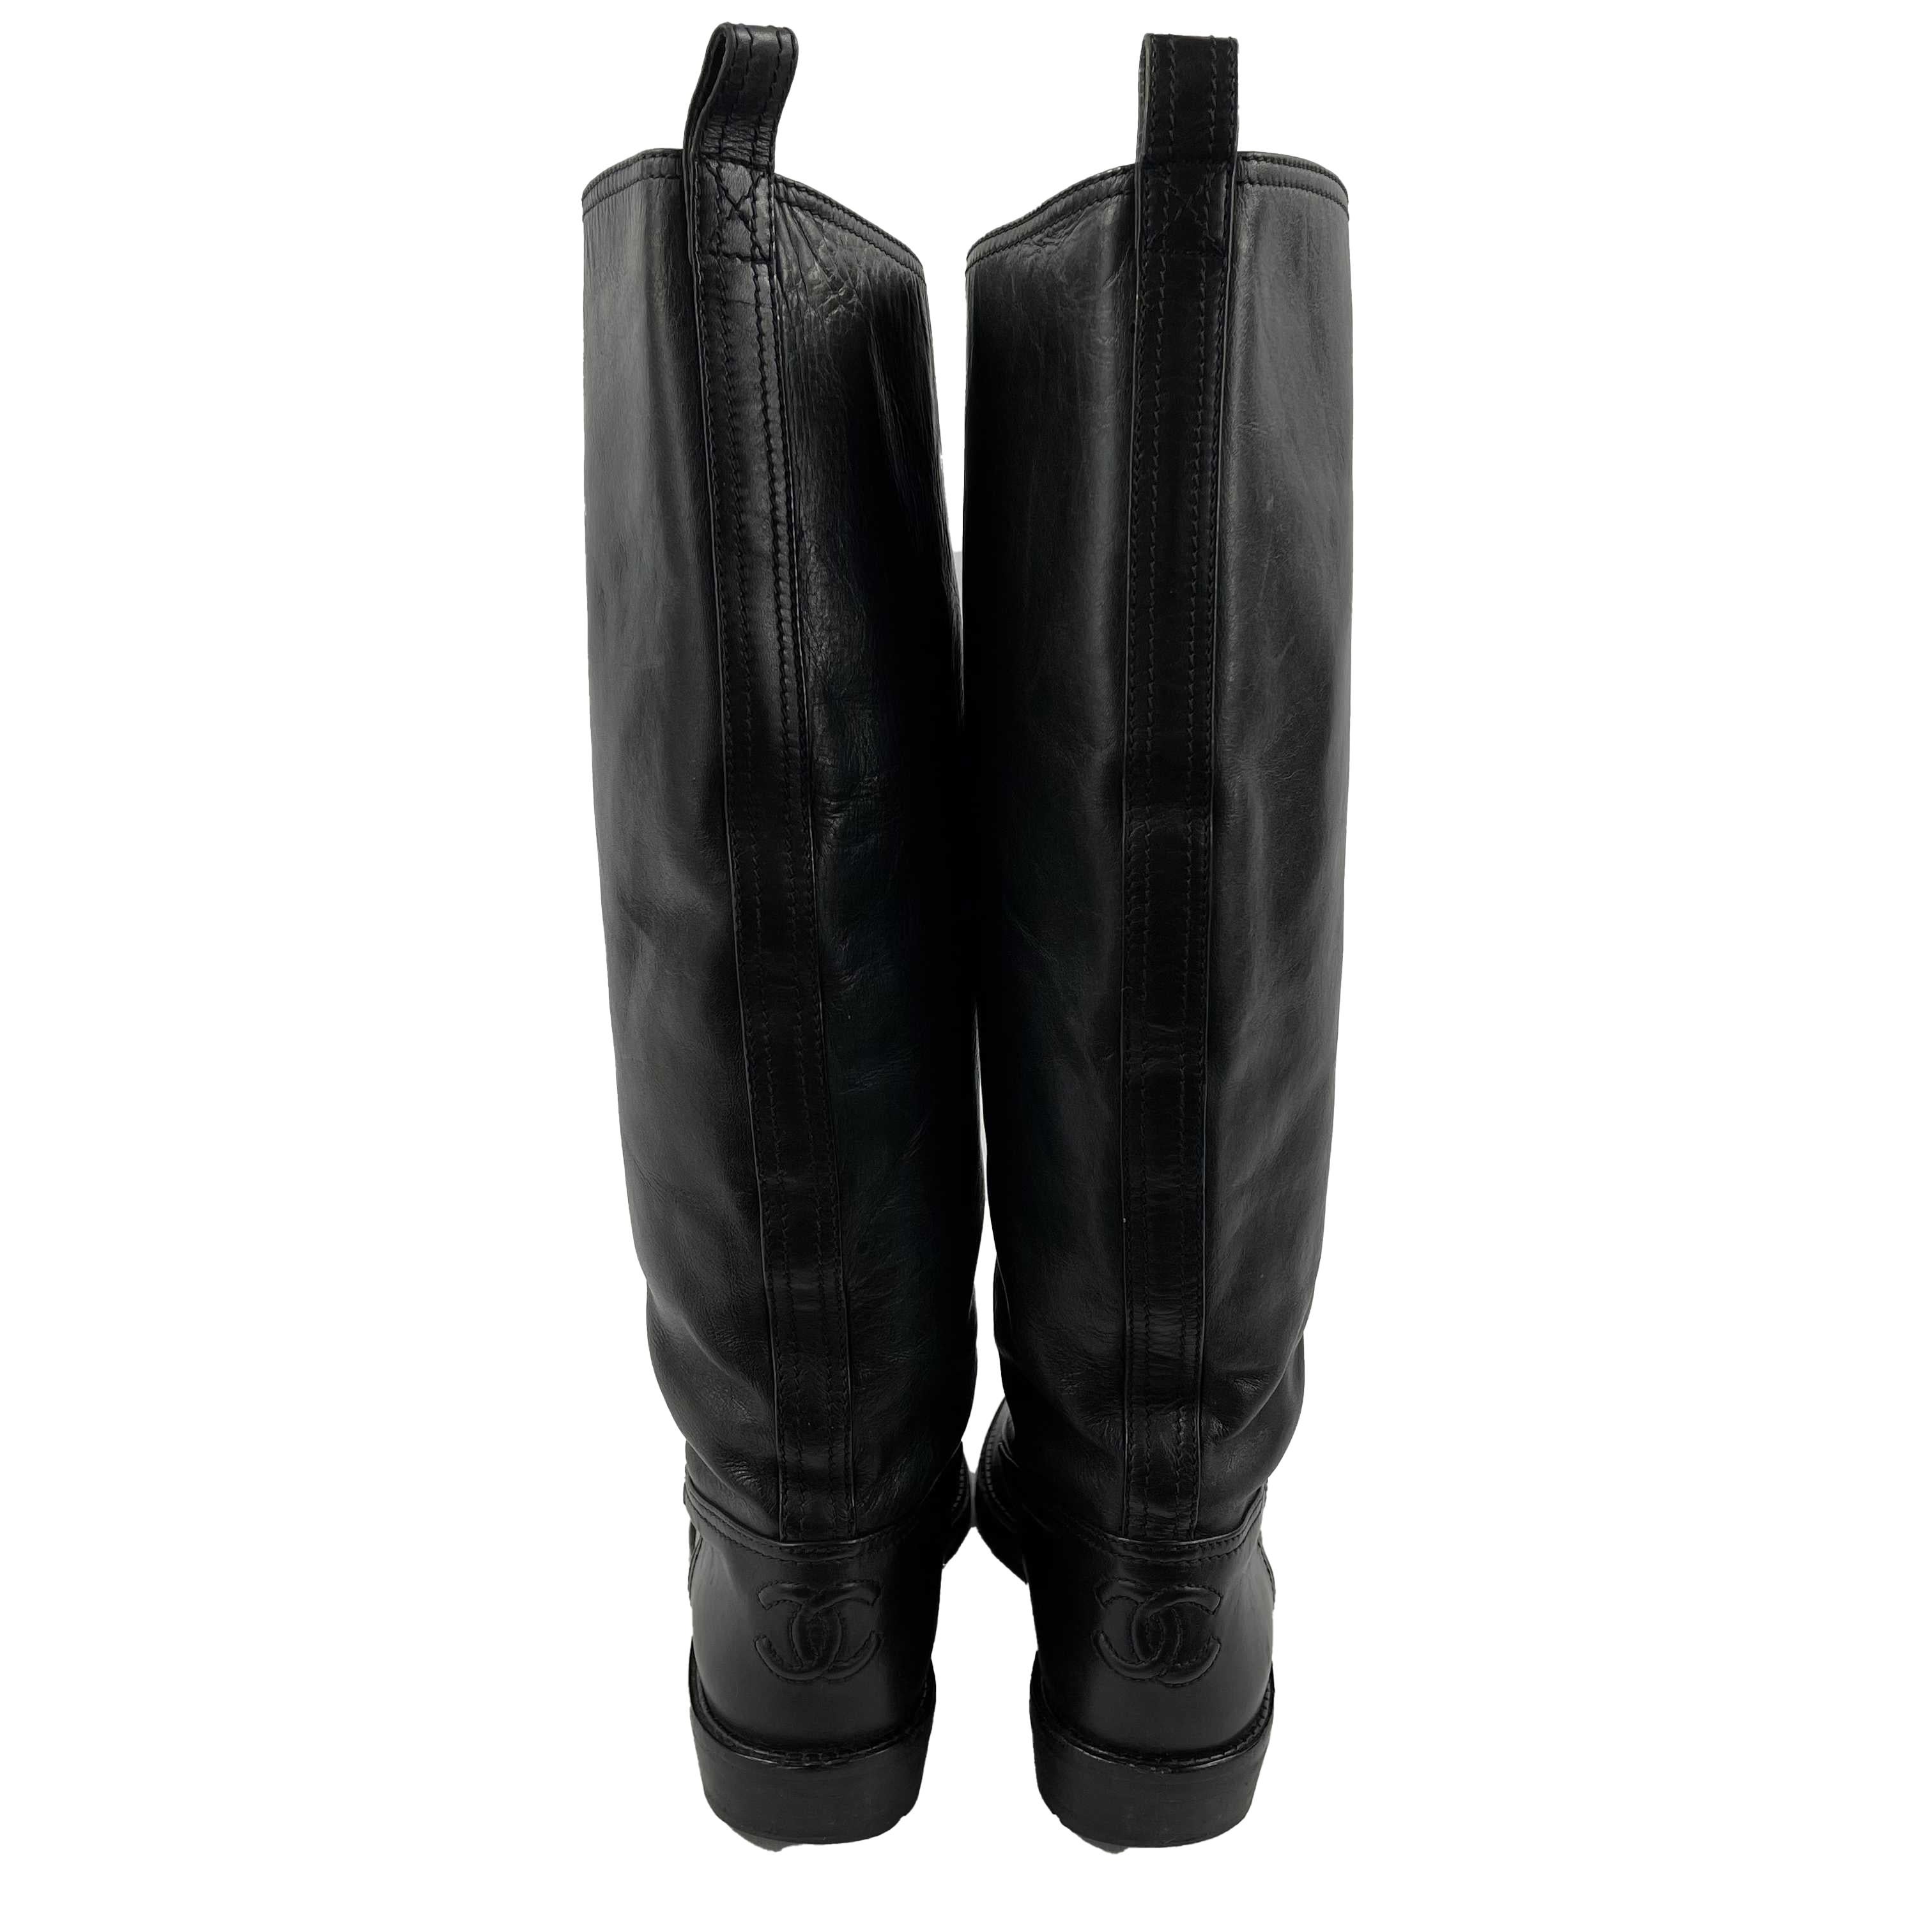 Chanel - Very Good - Chanel High Leather Lace-Up Biker Boots/ - Black - 36 - Shoes

Description

These black leather Chanel knee-high boots feature an interlocking CC on the back heel side, stacked heels and lace-up closures at uppers with leather